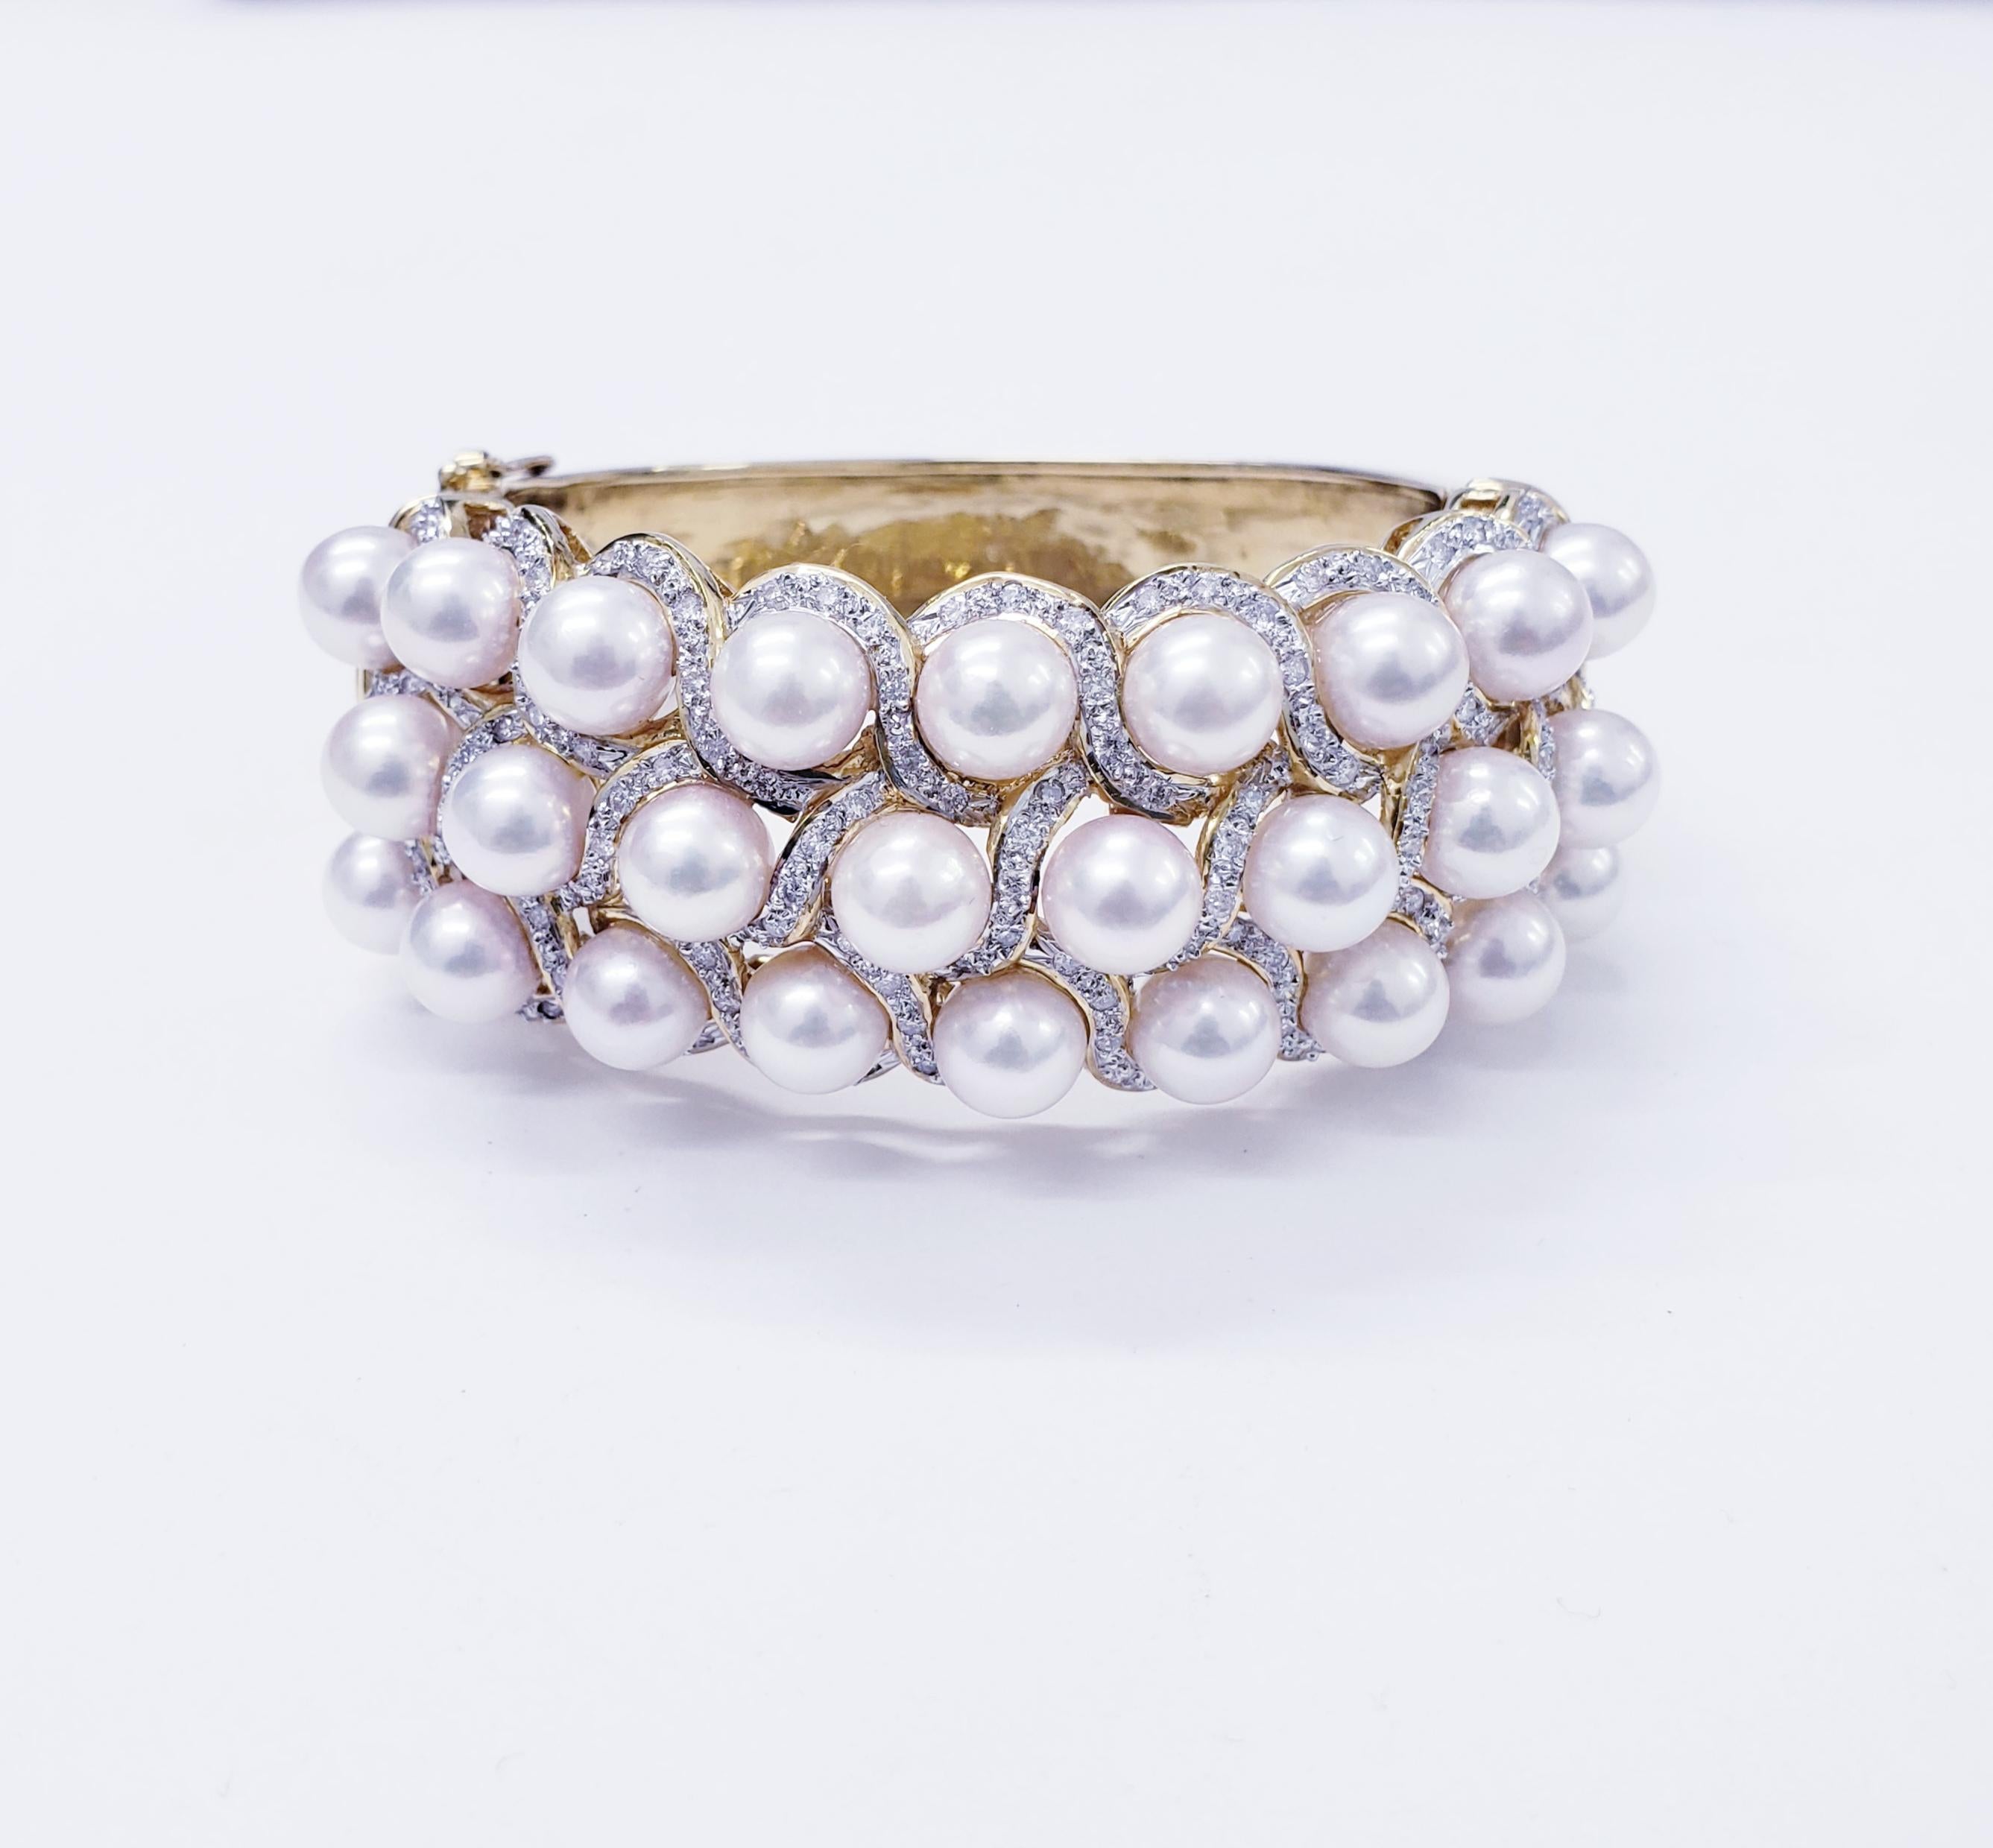 Midcentury Outstanding Luxury Diamonds and Pearls Bangle Handcrafted in 18k Gold In Good Condition For Sale In Miami, FL